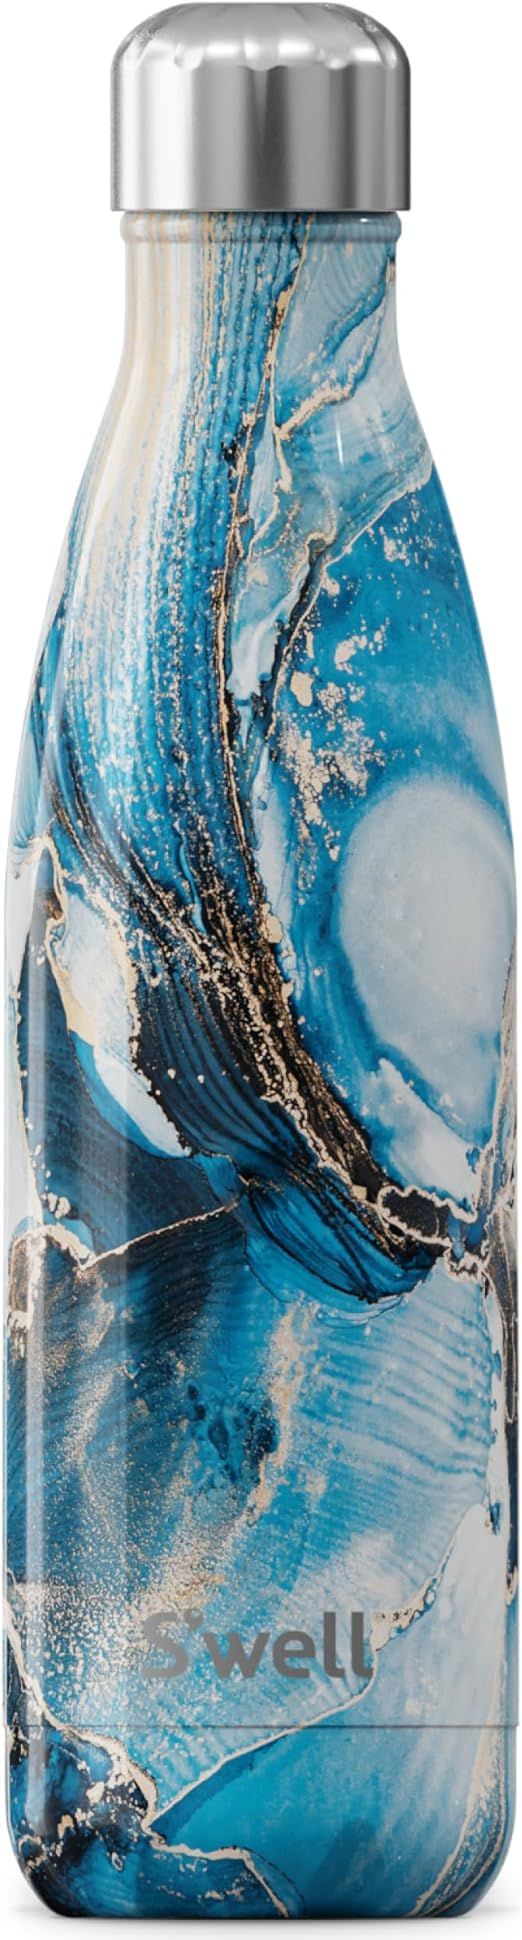 S'well Stainless Steel Water Bottle, 17oz, Ocean Marble, Triple Layered Vacuum Insulated Containe... | Amazon (US)